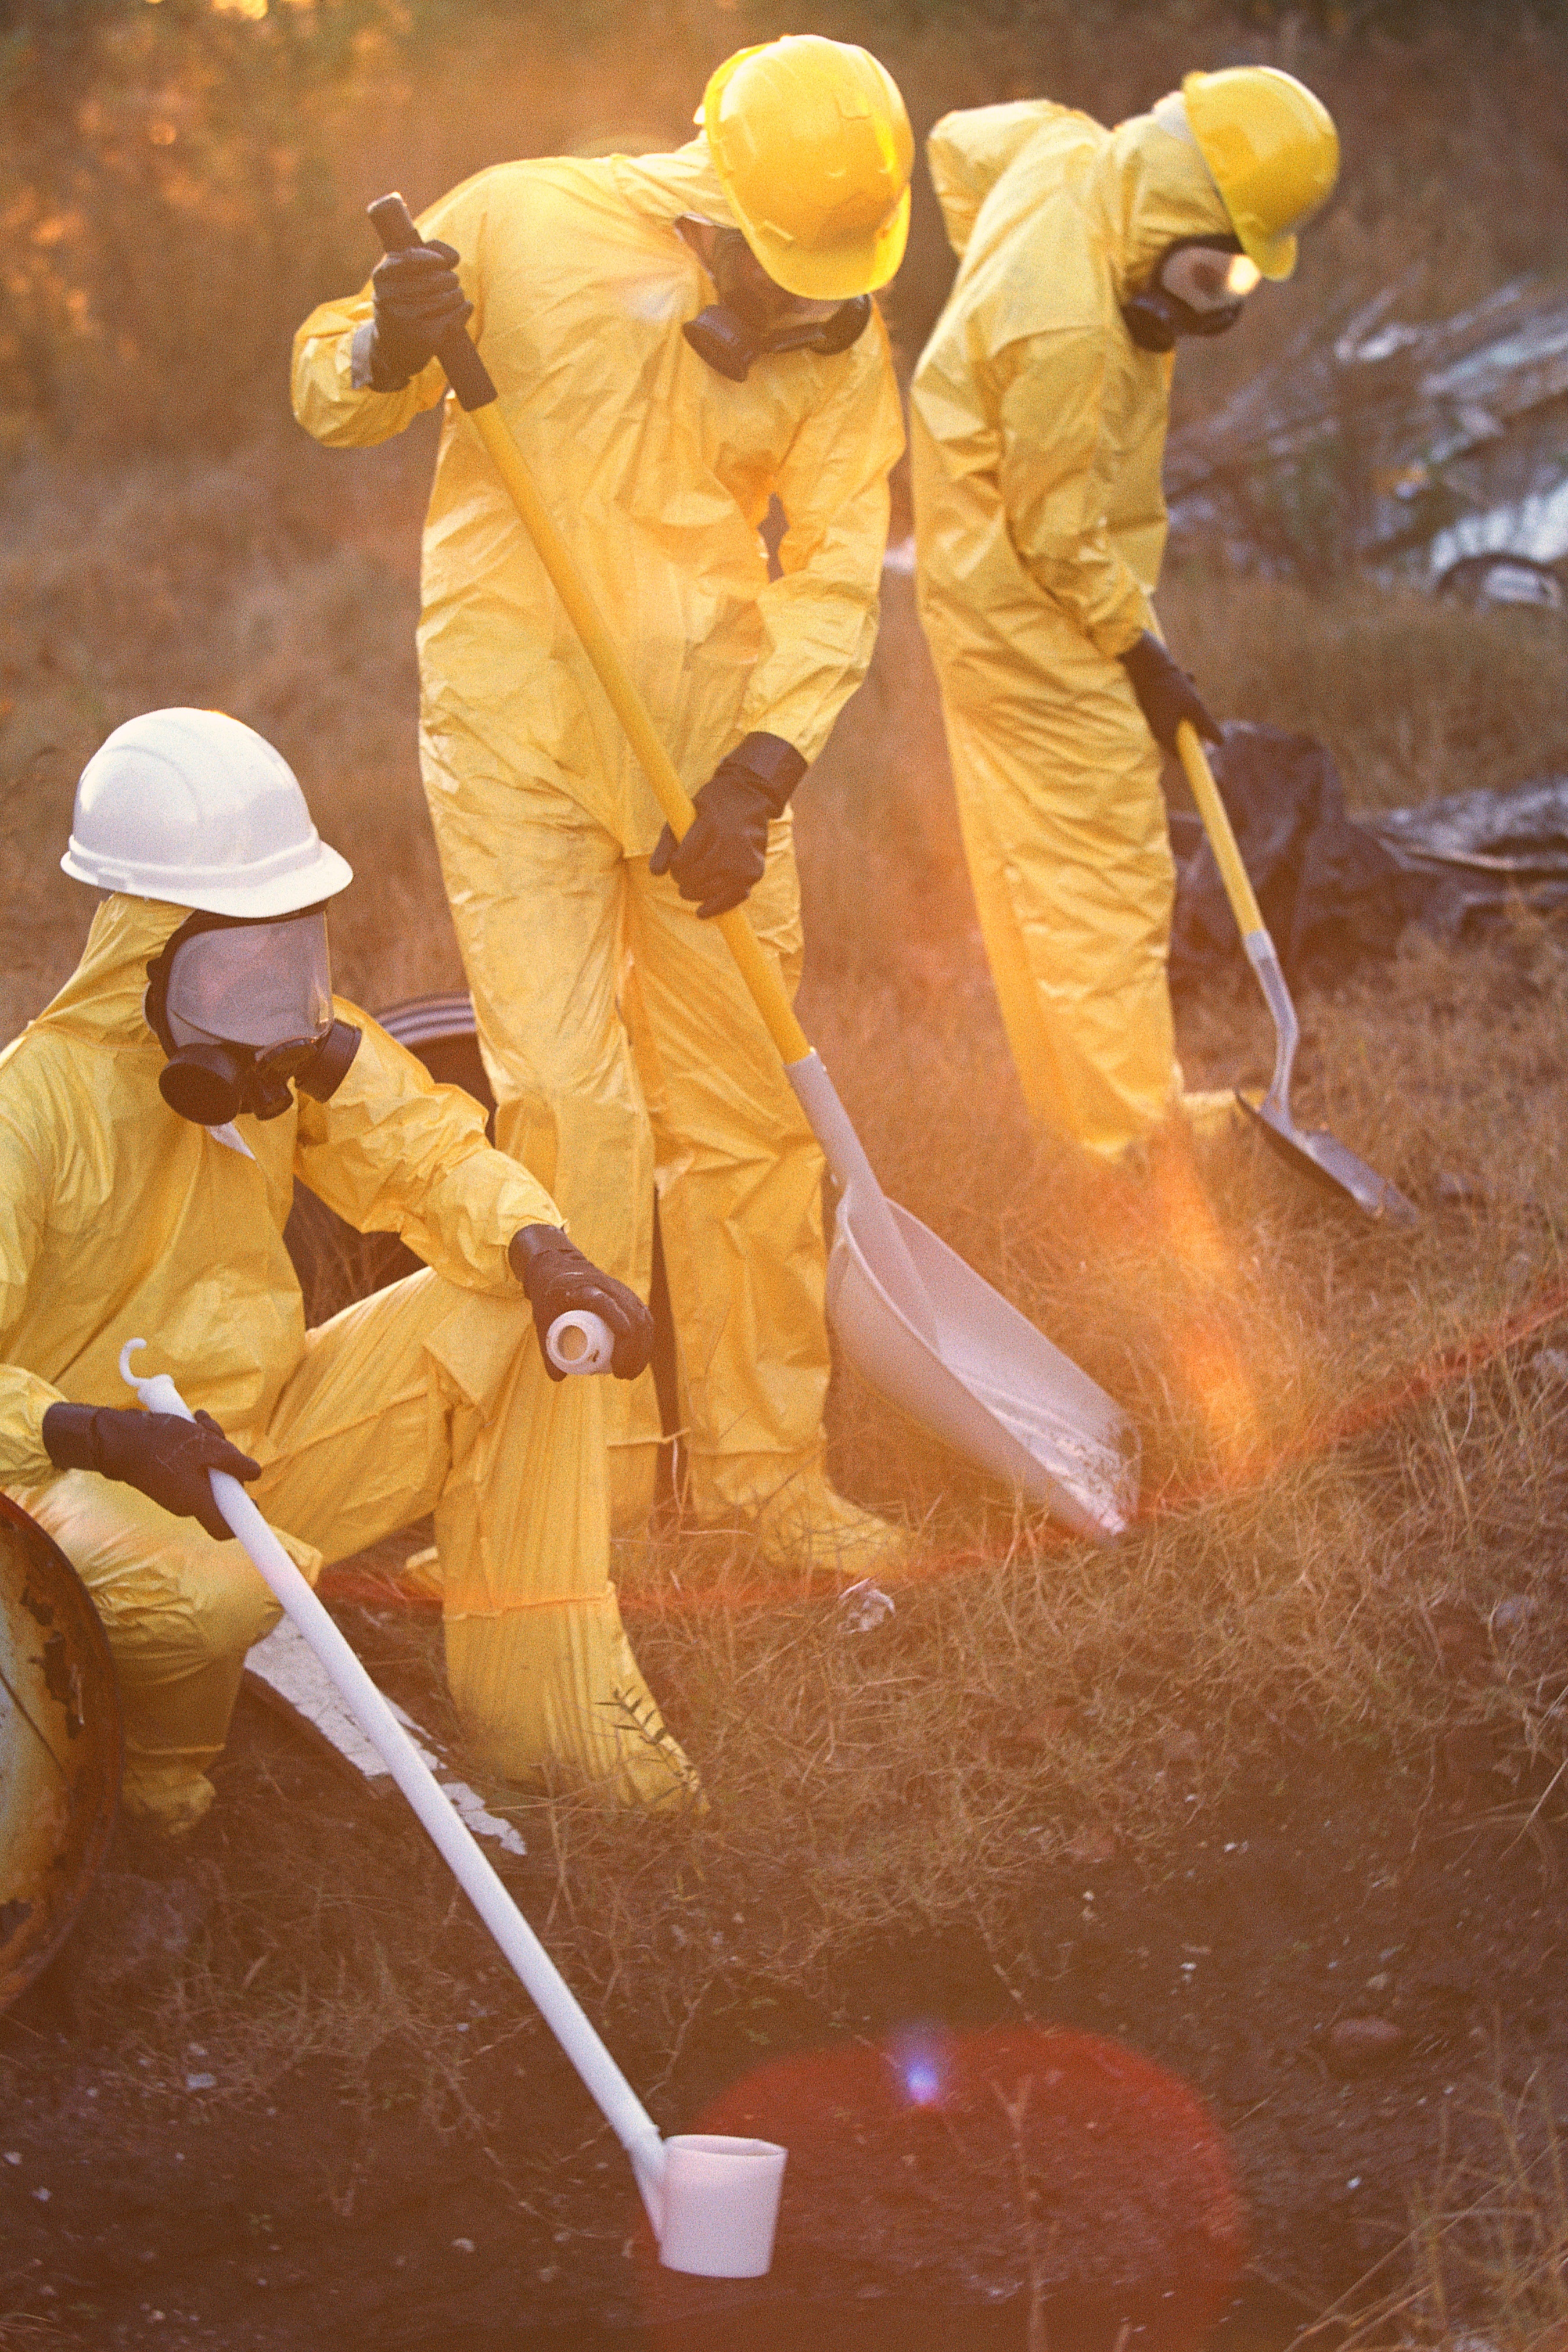 Workers in respirators, yellow PPE suits, and helmets work outdoors